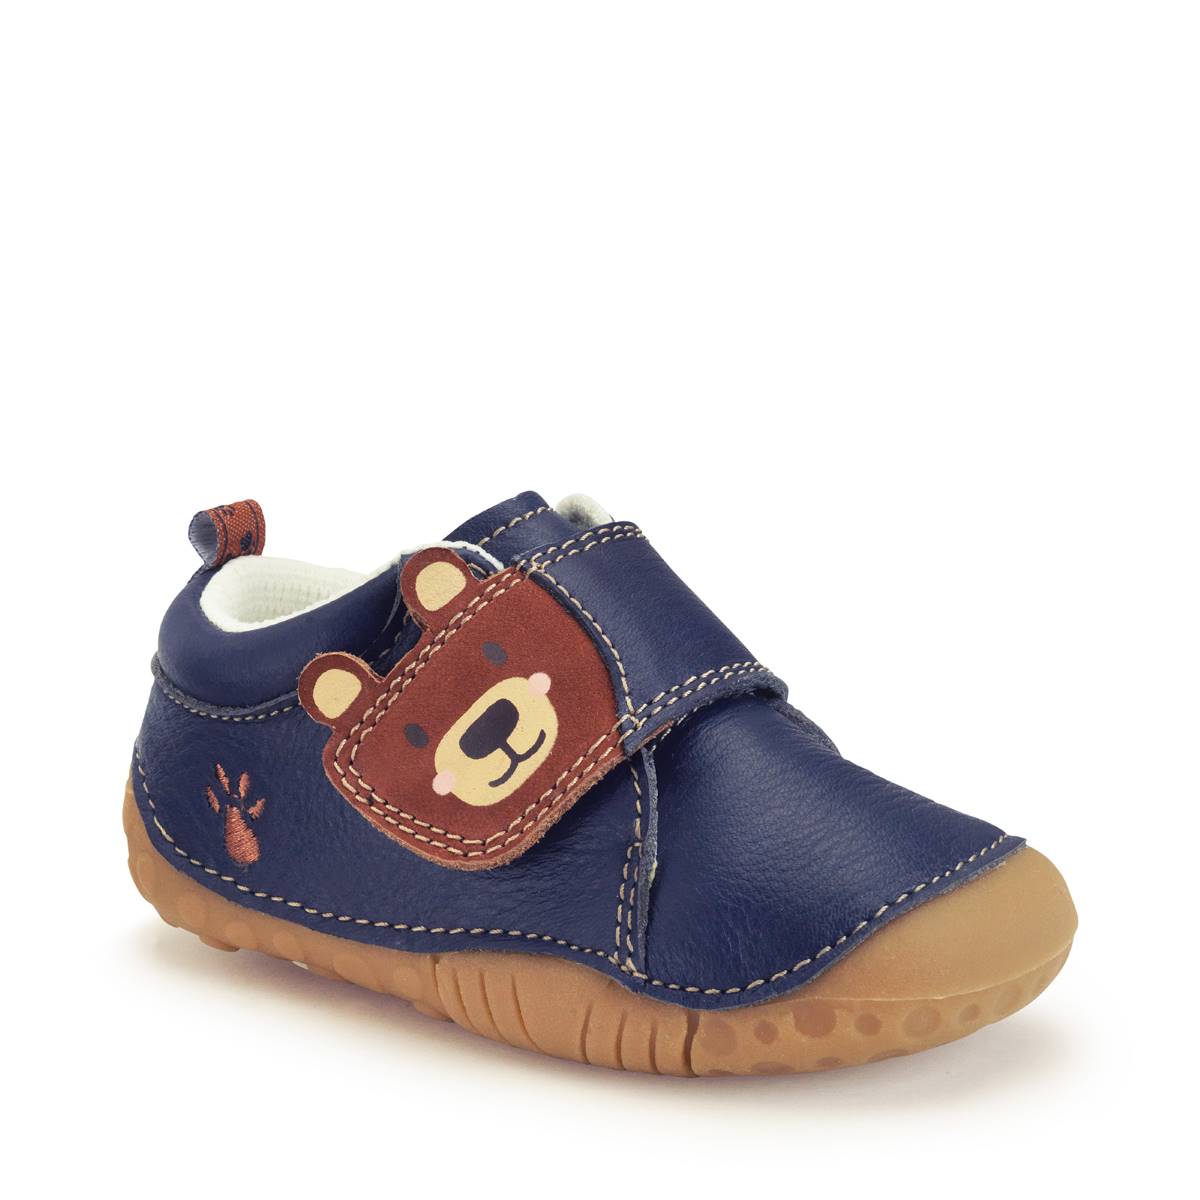 Start Rite Bear Hug 1v BLUE LEATHER Kids Boys First Shoes 0824-96F in a Plain Leather in Size 3.5